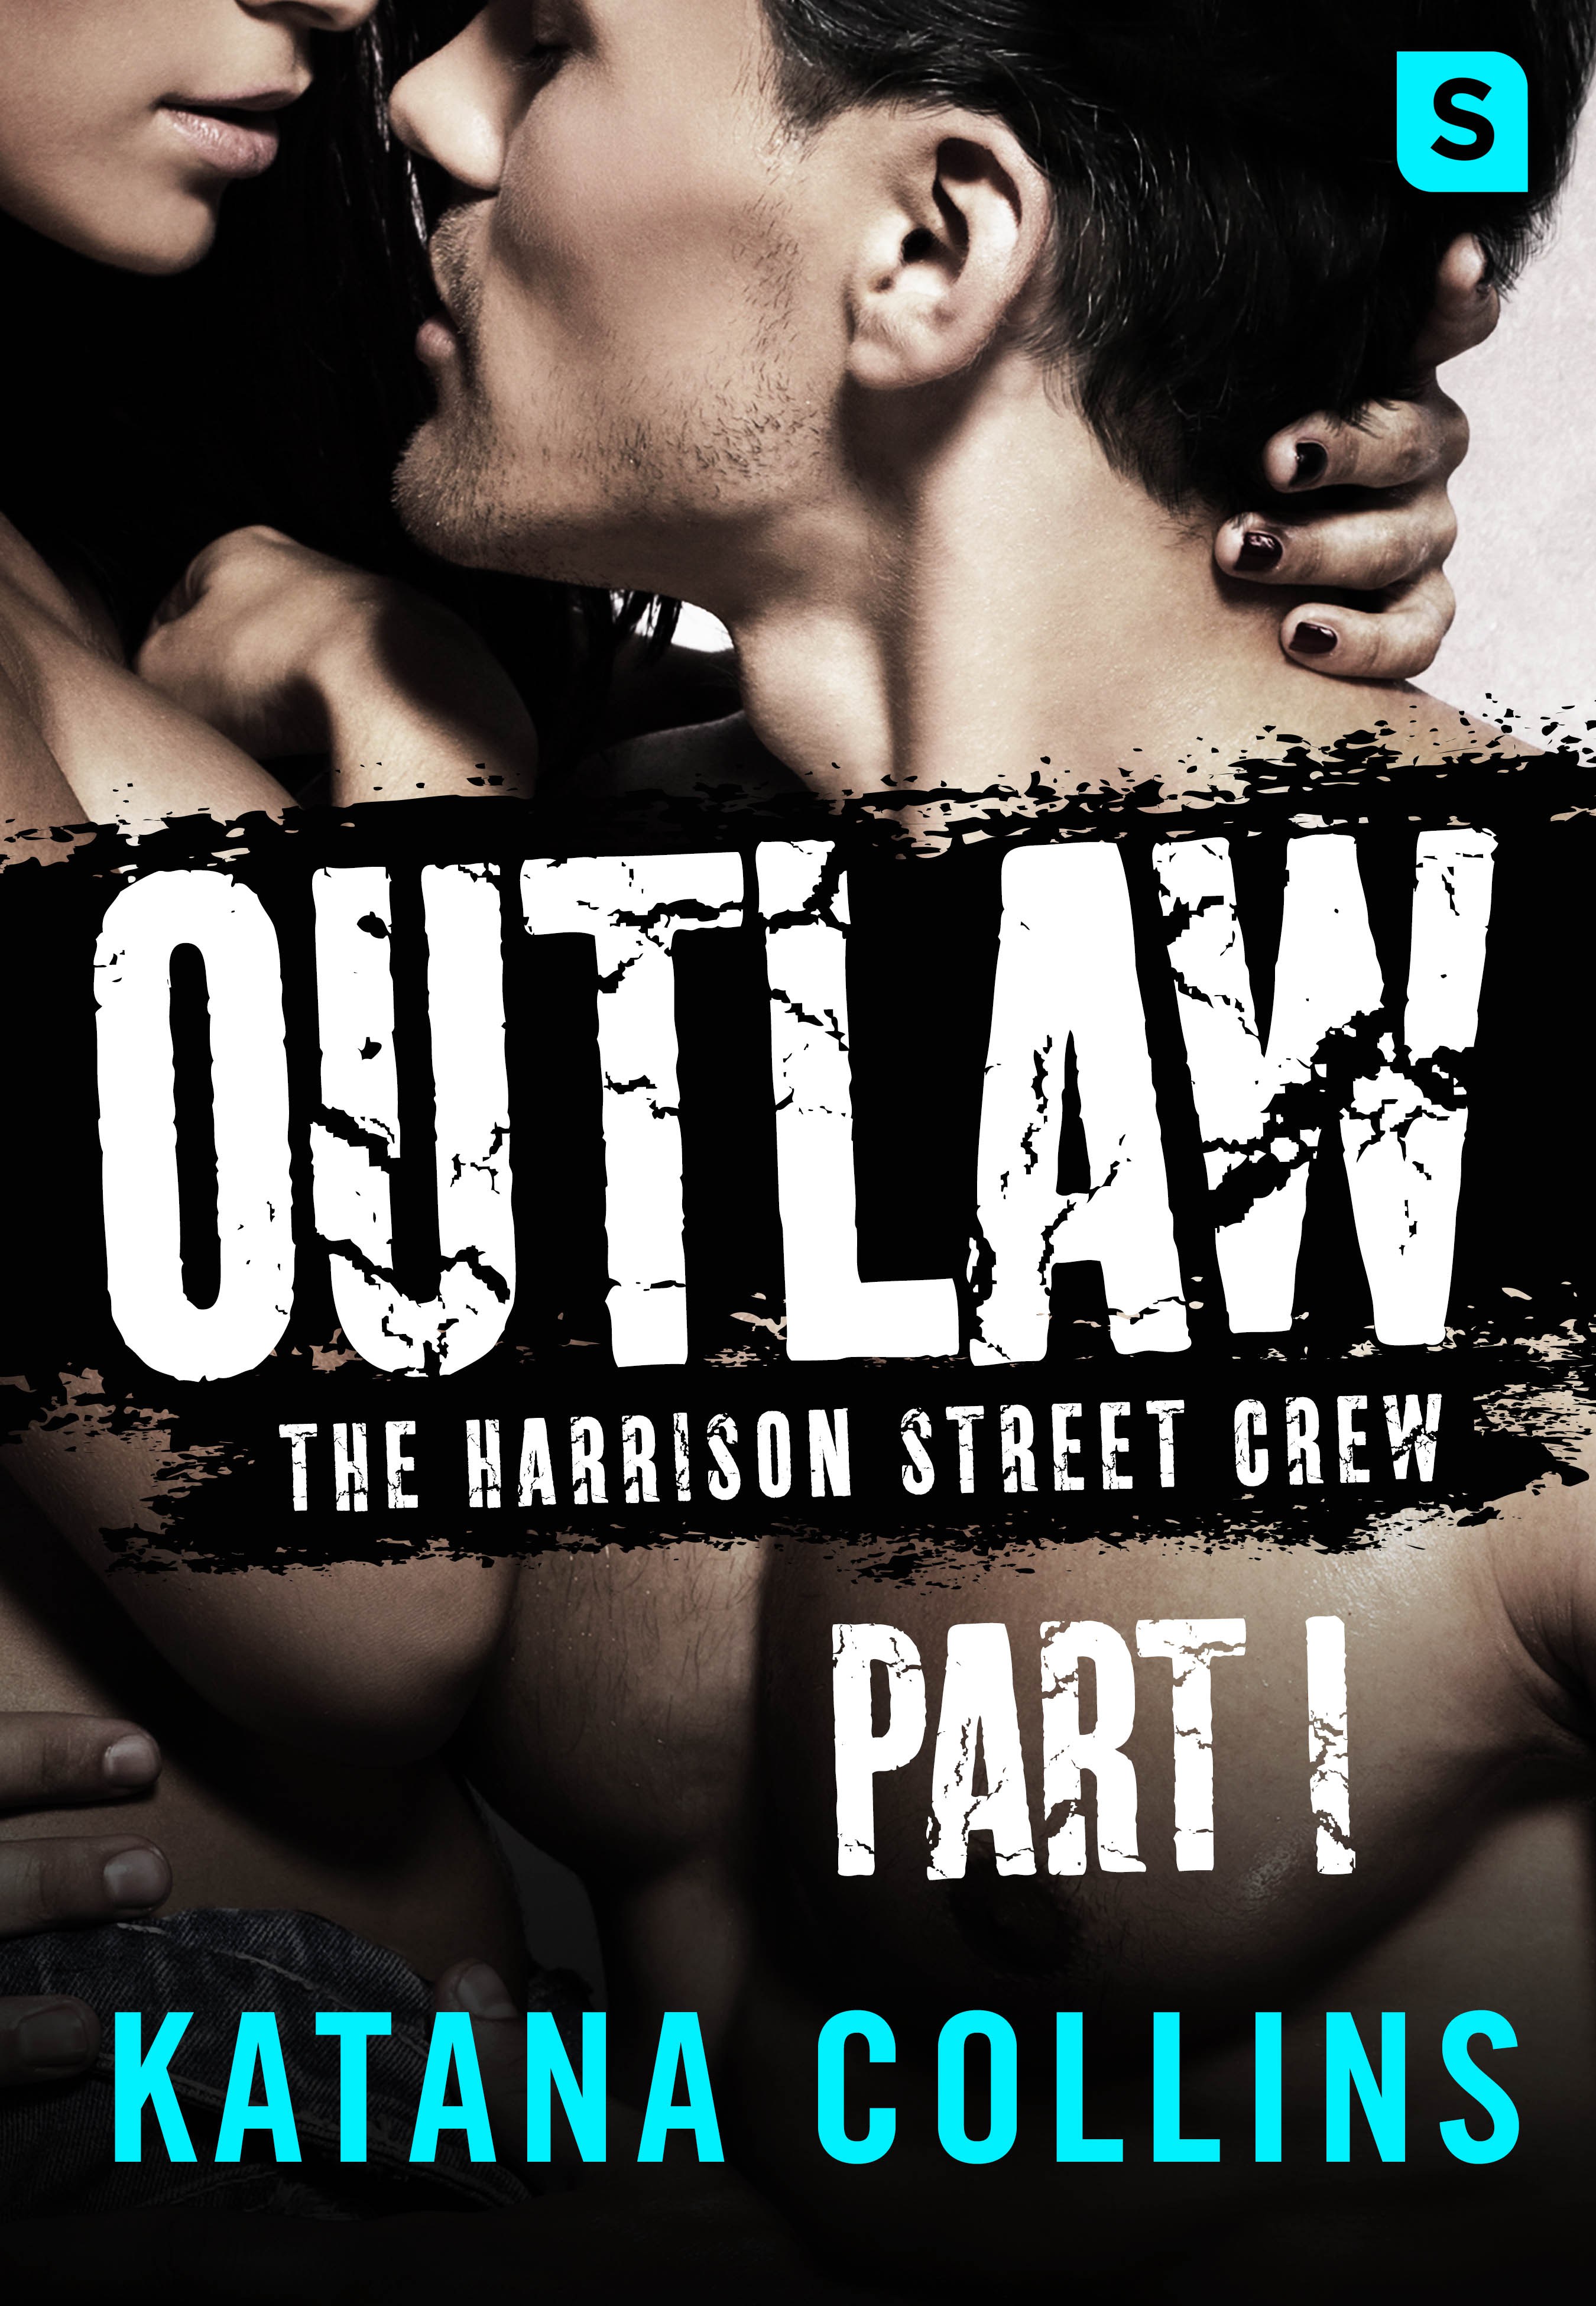 Outlaw Part 1 by Katana Collins